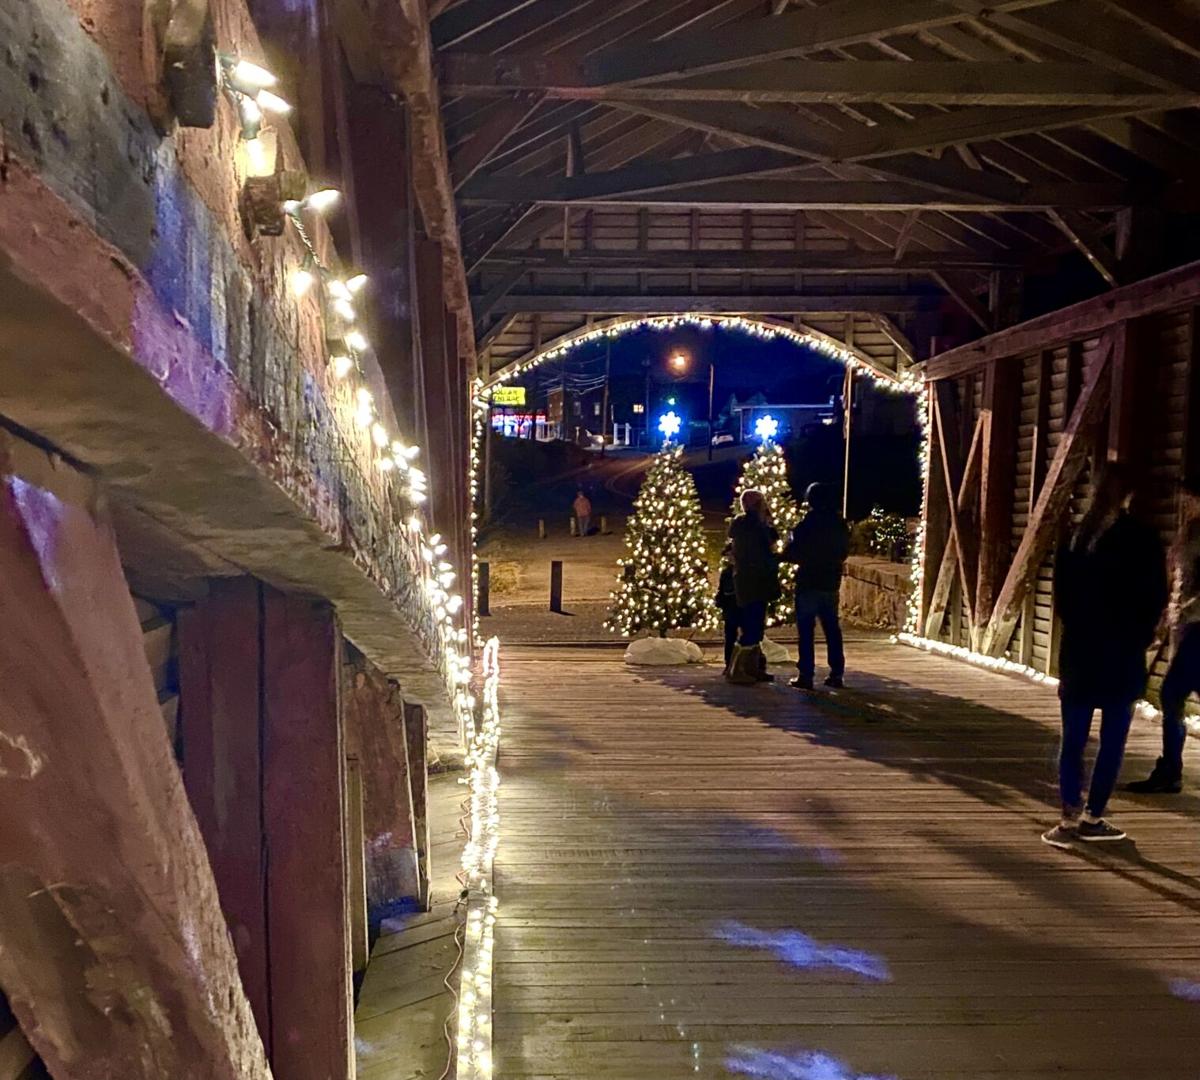 Inside the historic Barrackville bridge with its thousands of Christmas lights